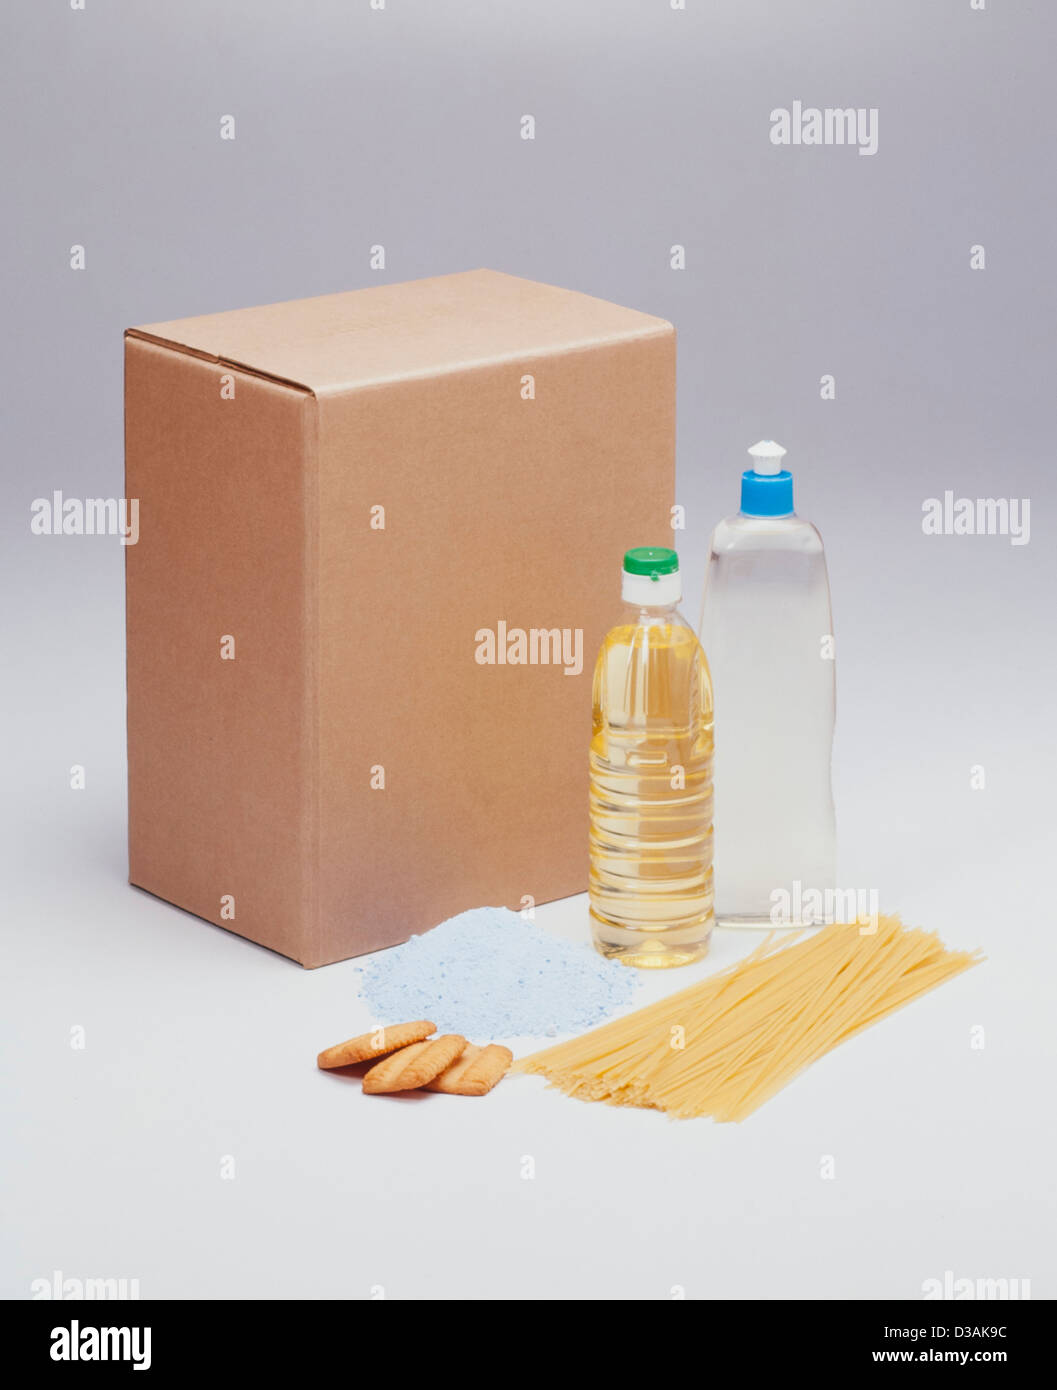 Corrugated cardboard packaging for various products Stock Photo